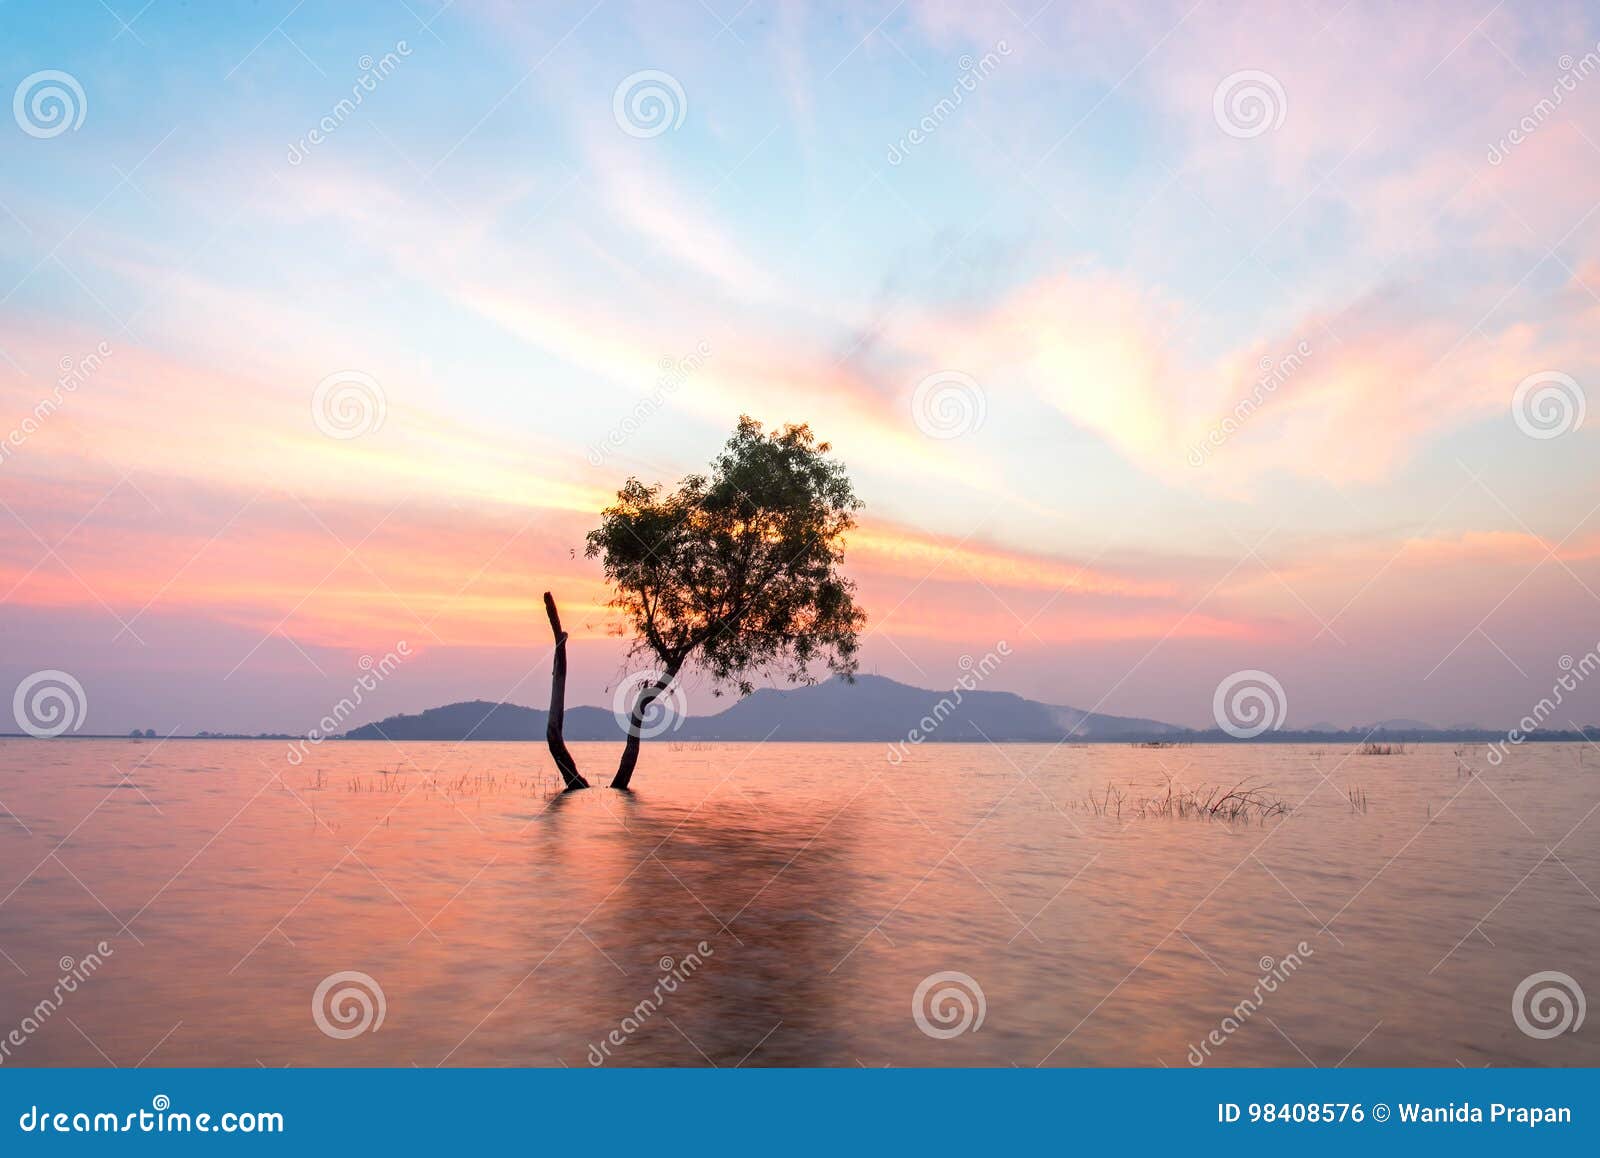 alone alive tree is in the flood water of lake at sunset scenery in reservoirs,